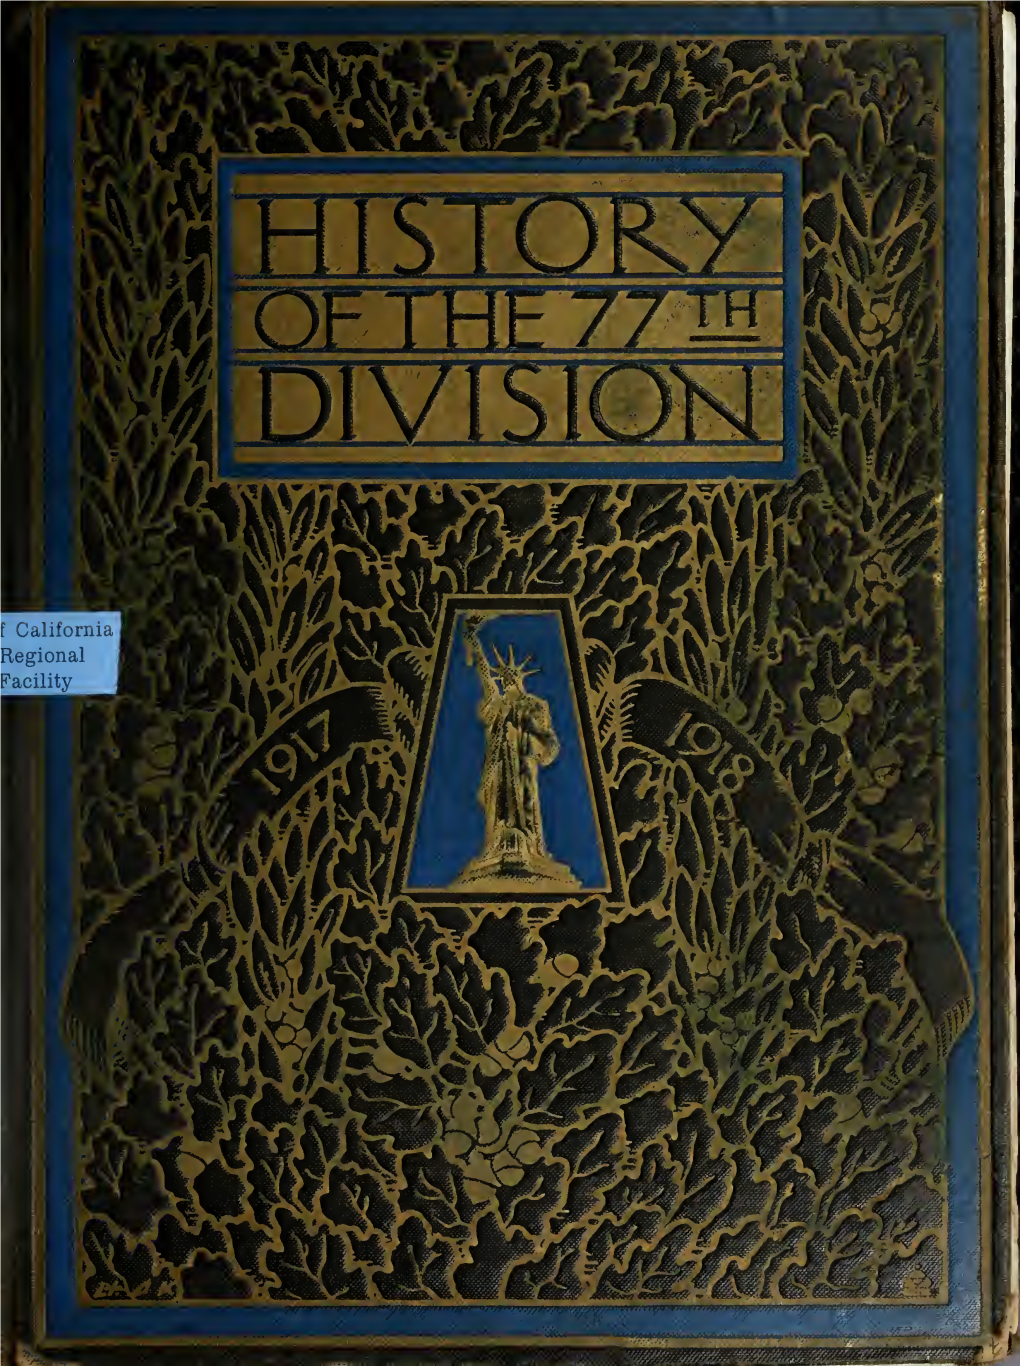 History of the Seventy Seventh Division, August 25Th, 1917, November 11Th, 1918